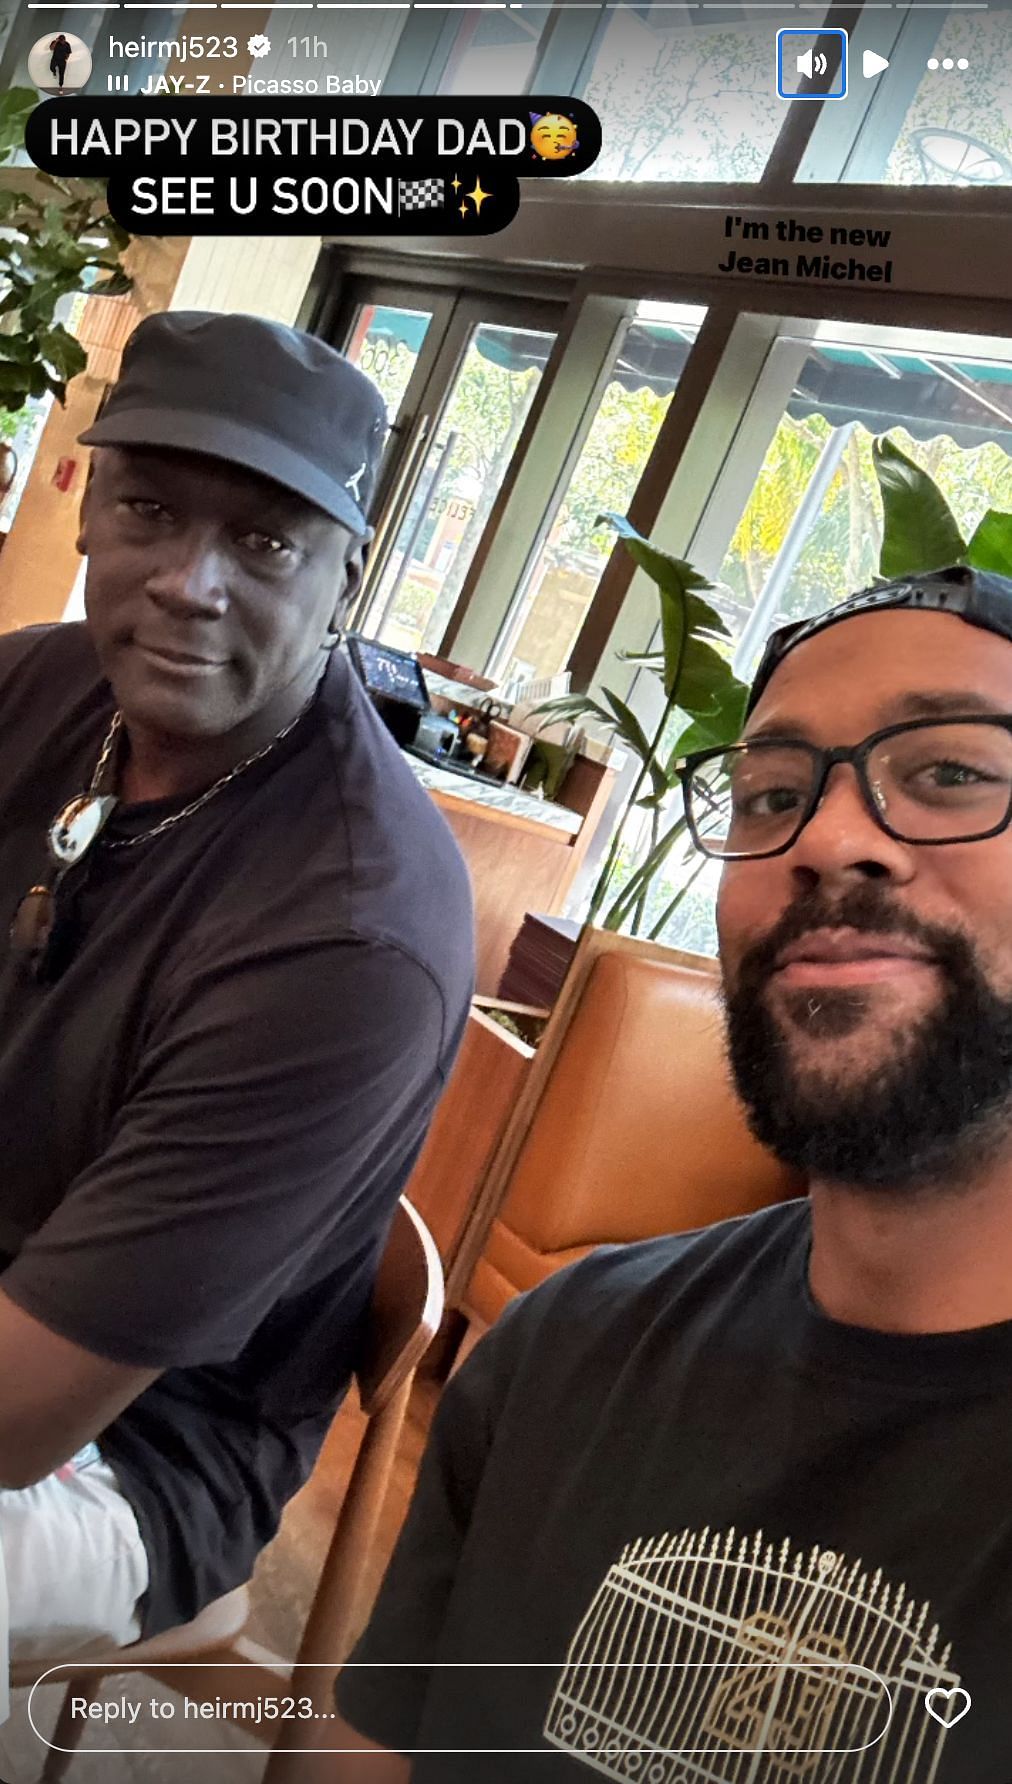 Marcus got a selfie clicked with his father MJ